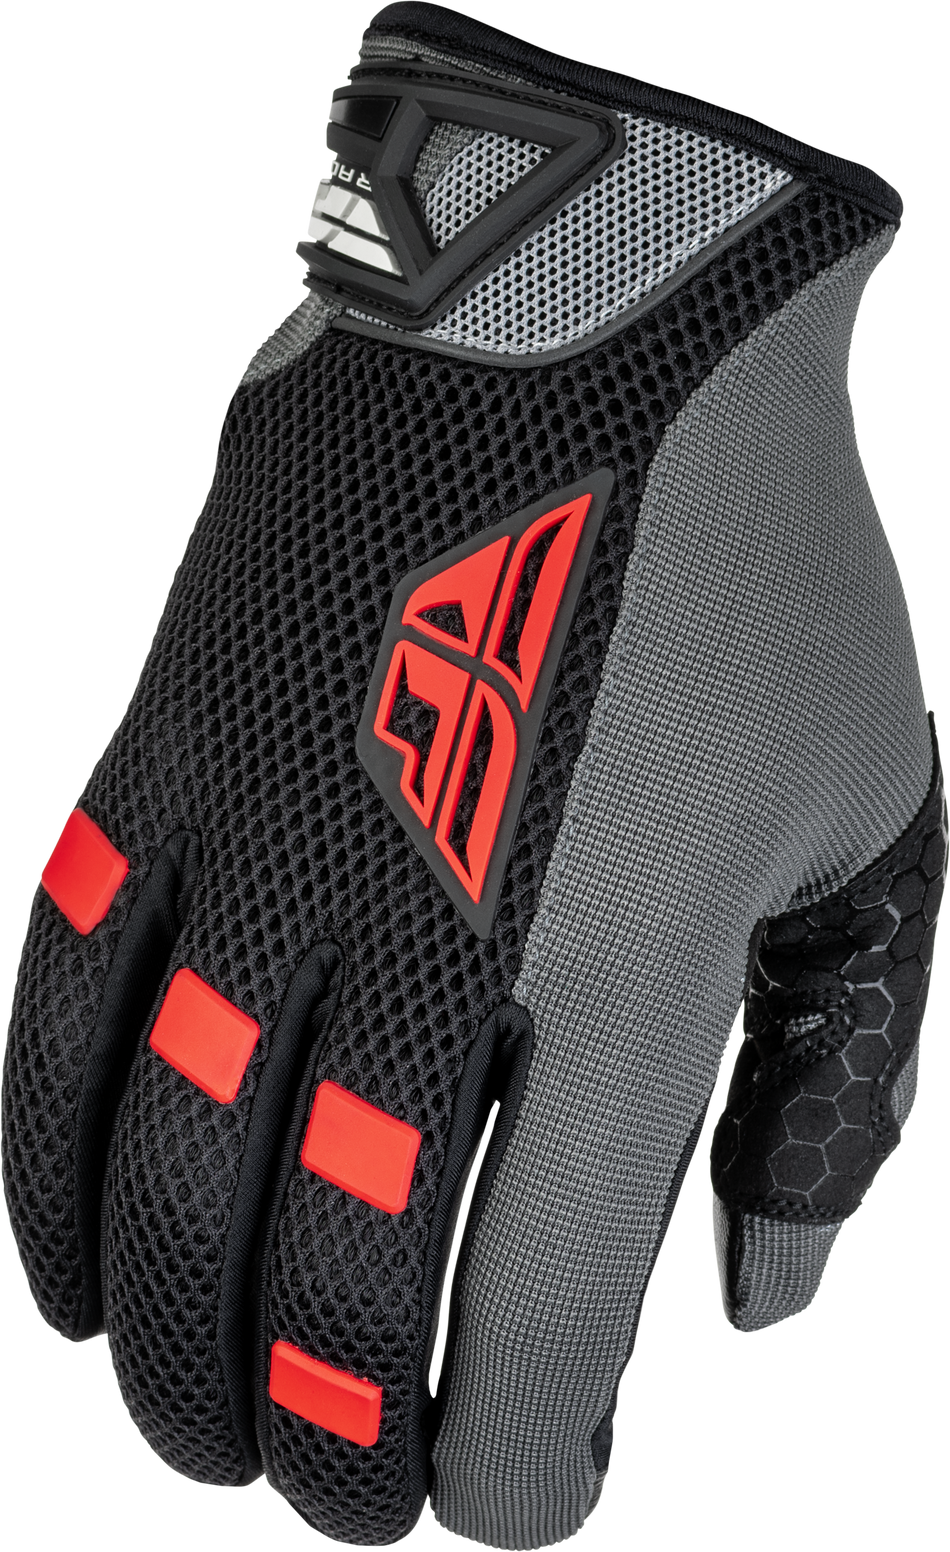 FLY RACING Coolpro Gloves Black/Red Xs 476-4026XS